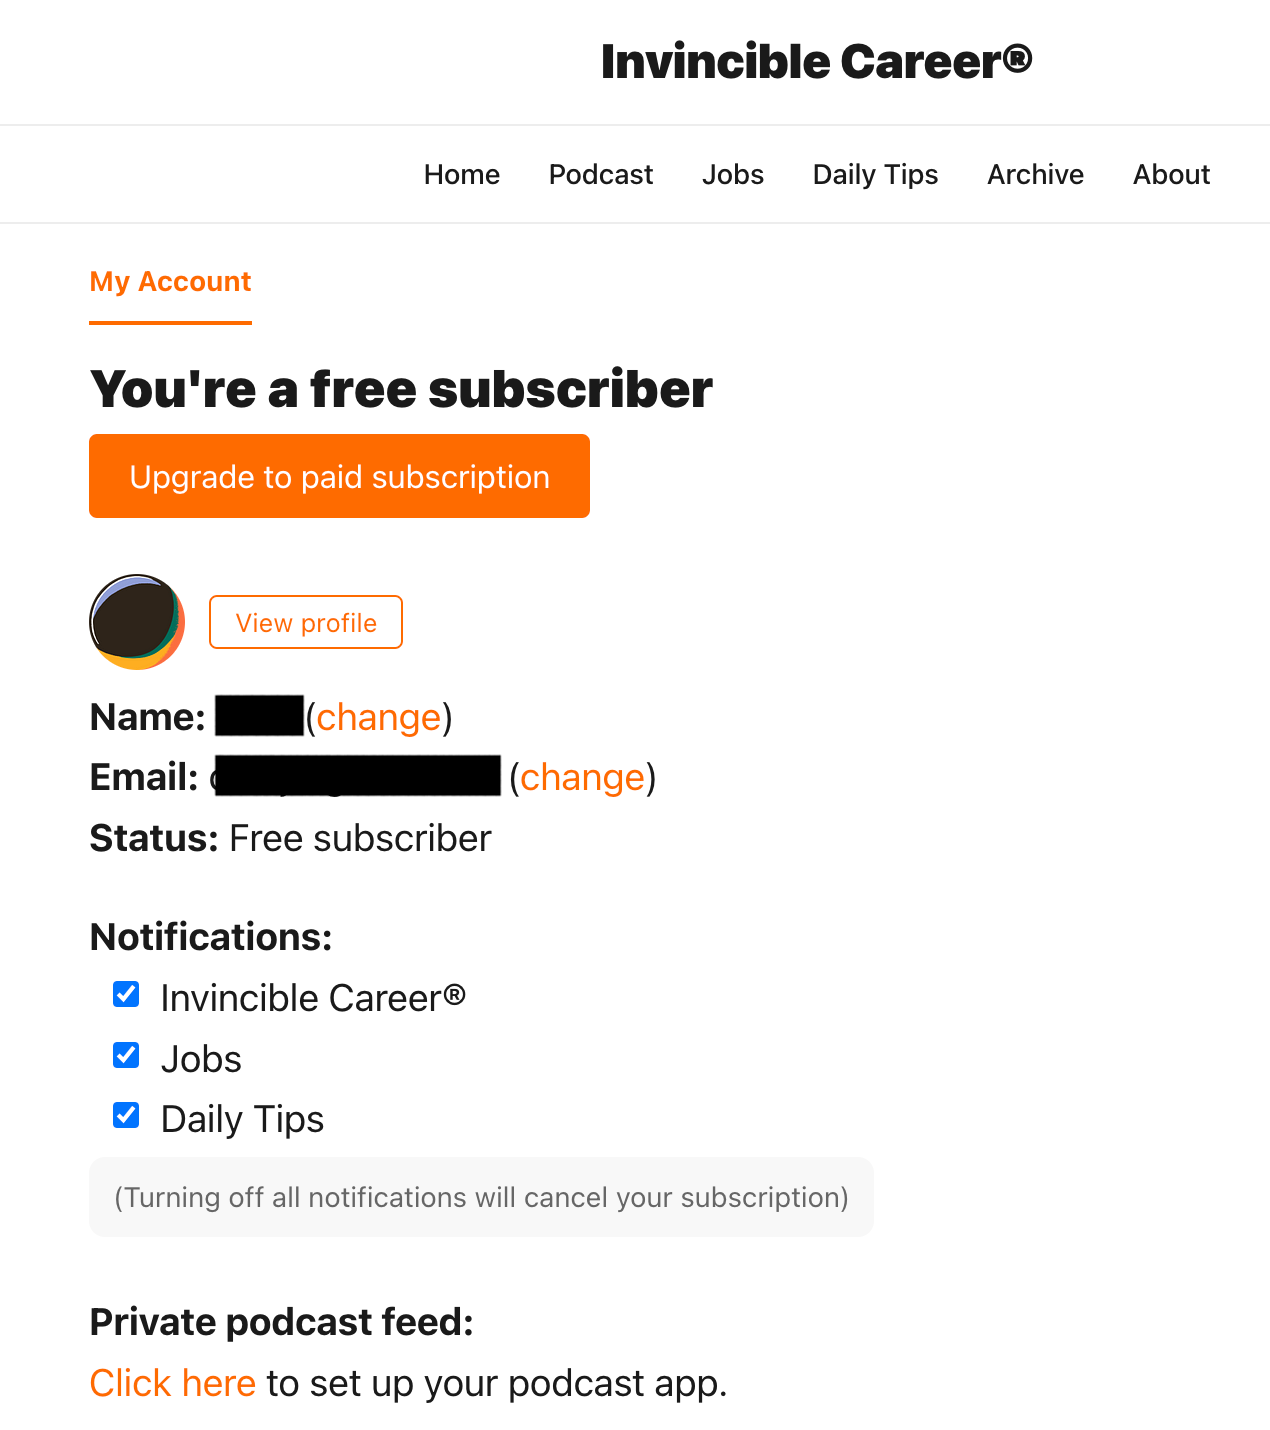 Your subscription settings